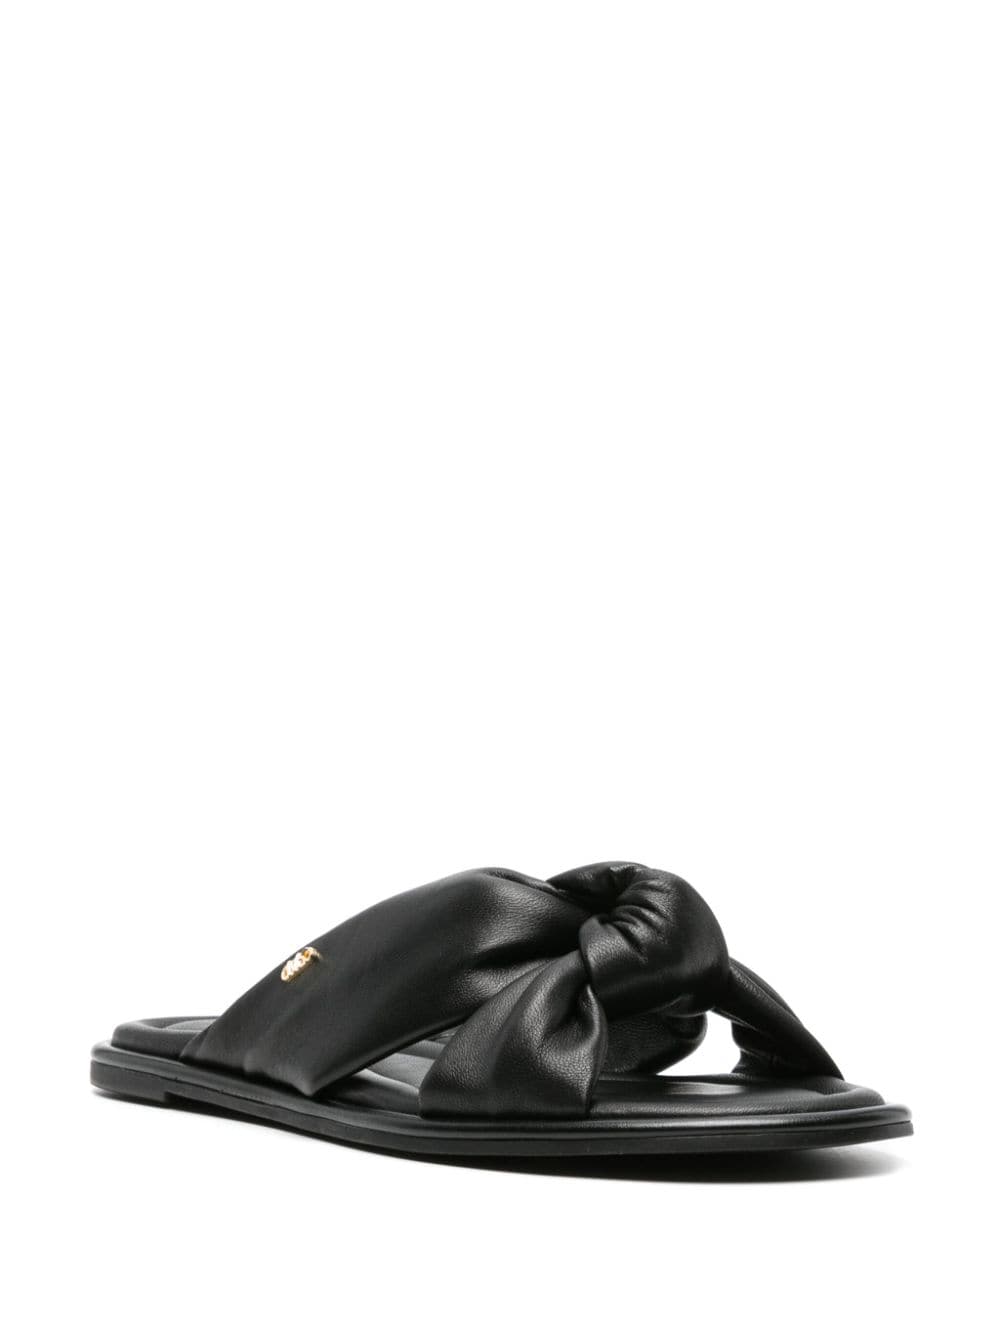 Image 2 of Michael Michael Kors Elena knotted leather slides